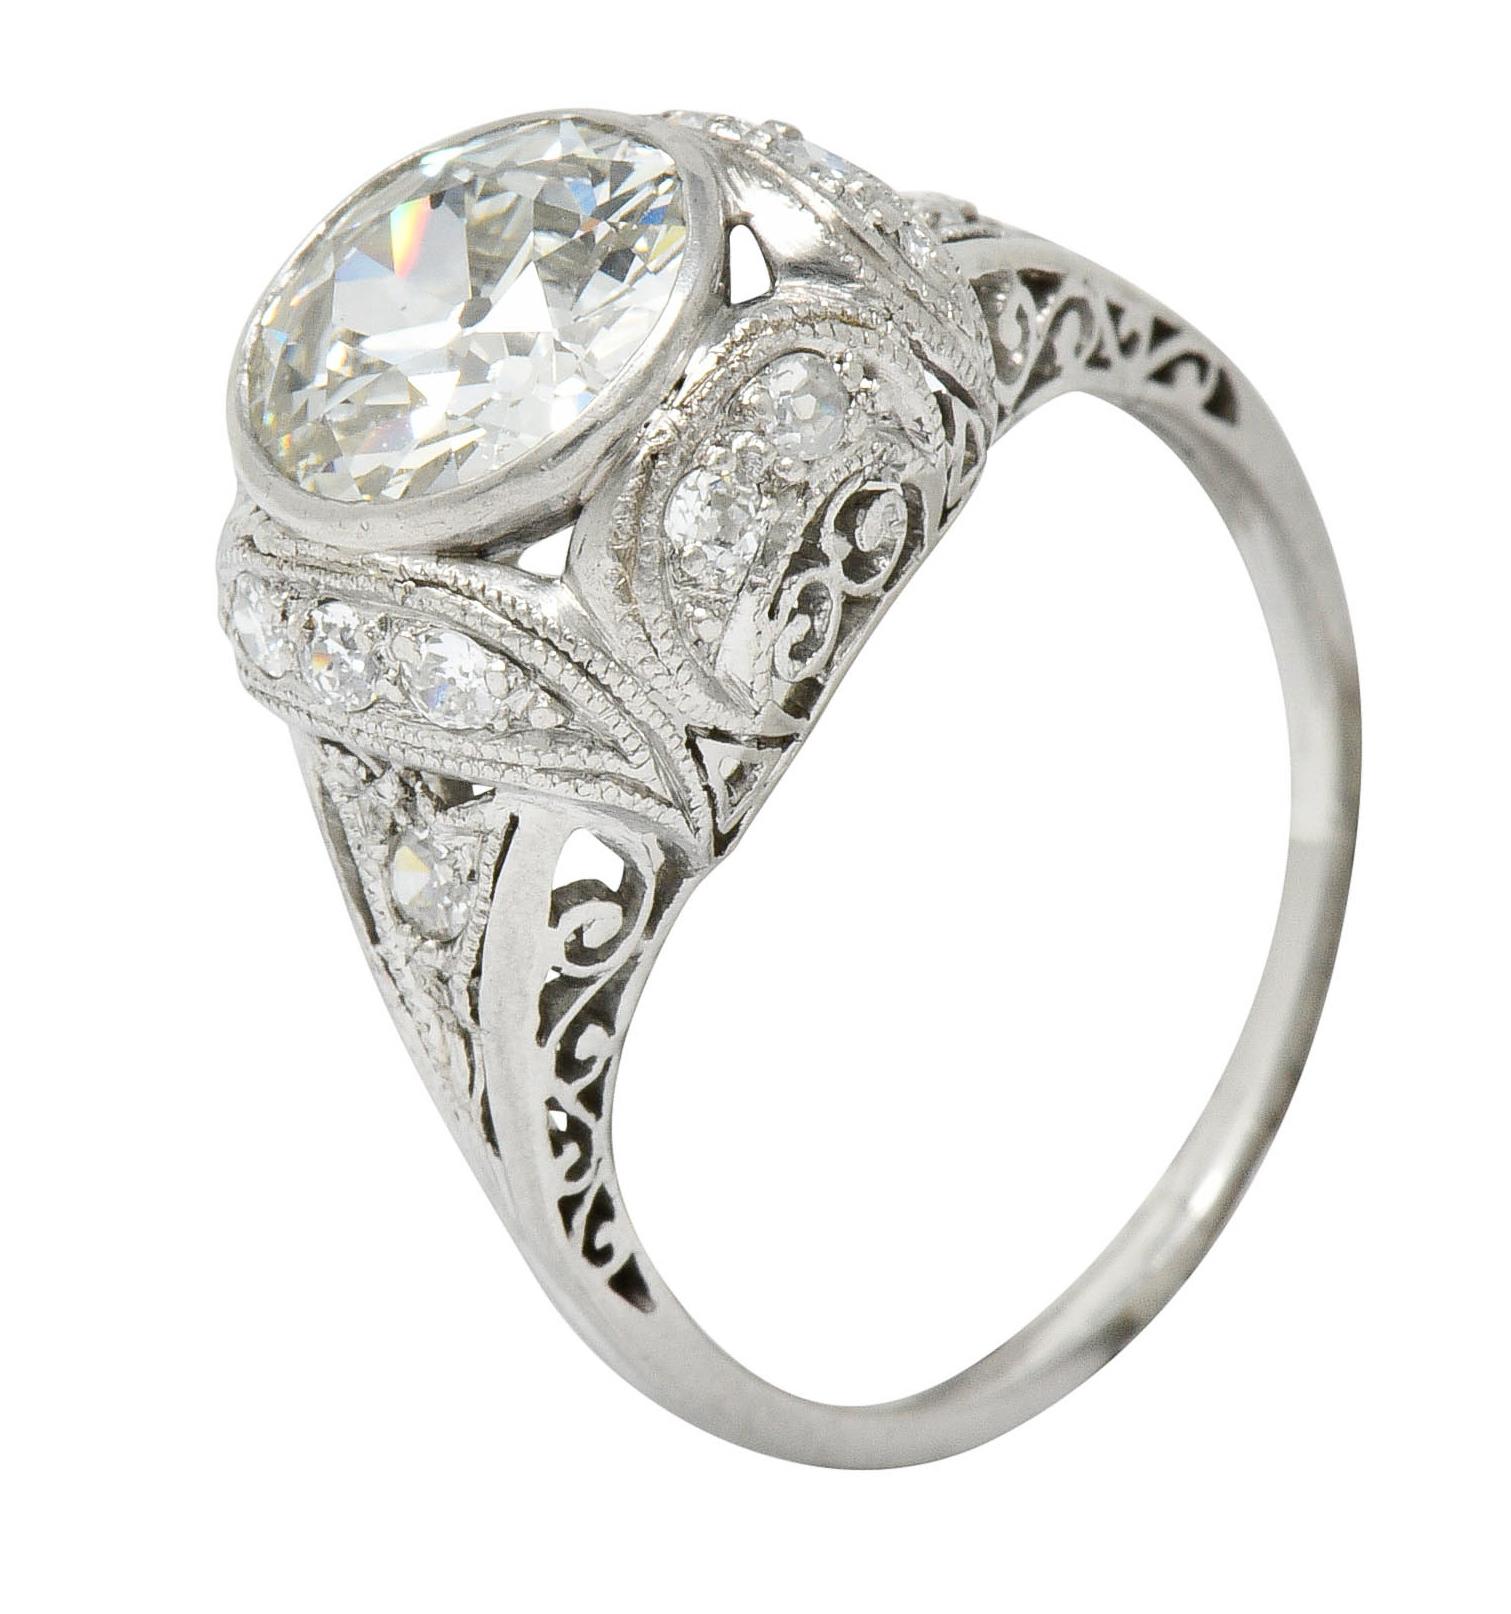 Centering a bezel set old European cut diamond weighing 1.73 carats; K color with SI1 clarity
With a cushioned surround, filigree gallery, and pointed shoulders

Accented by old European cut diamonds weighing approximately 0.32 carats; eye-clean and